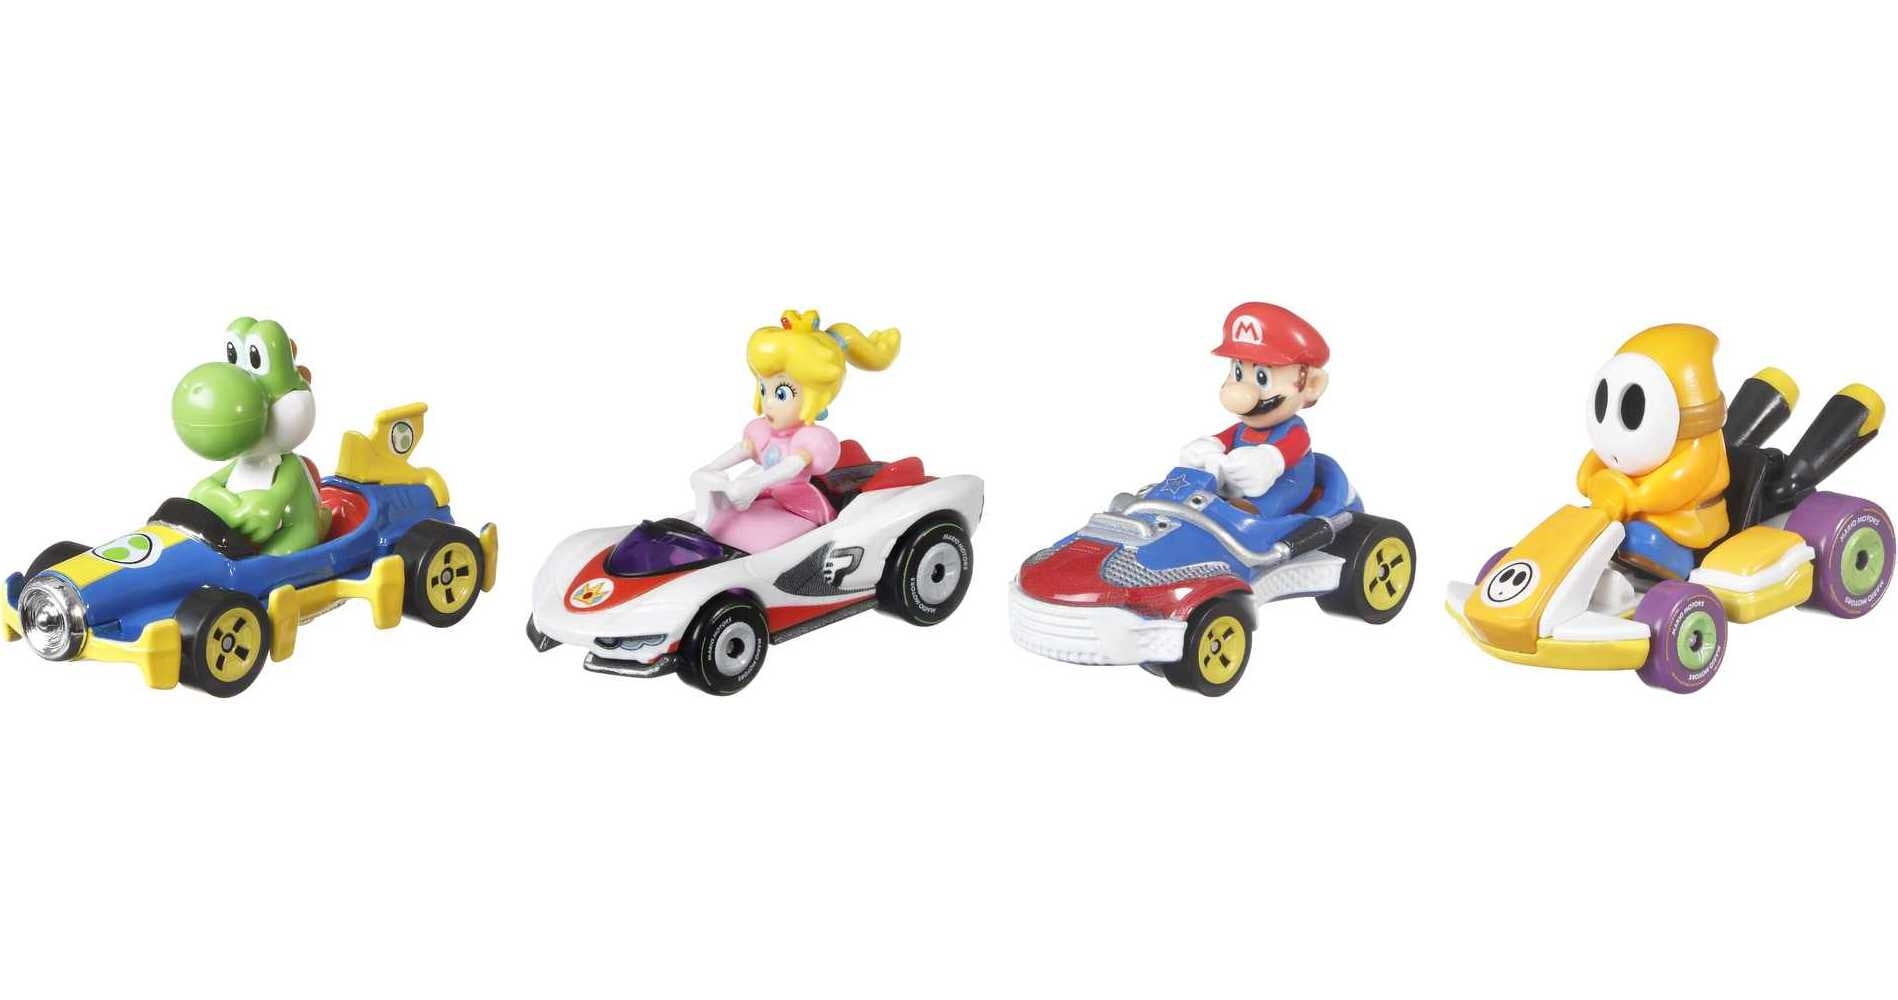 More photos of the new Mario Kart Hot Wheels sets, pre-orders starting to  open